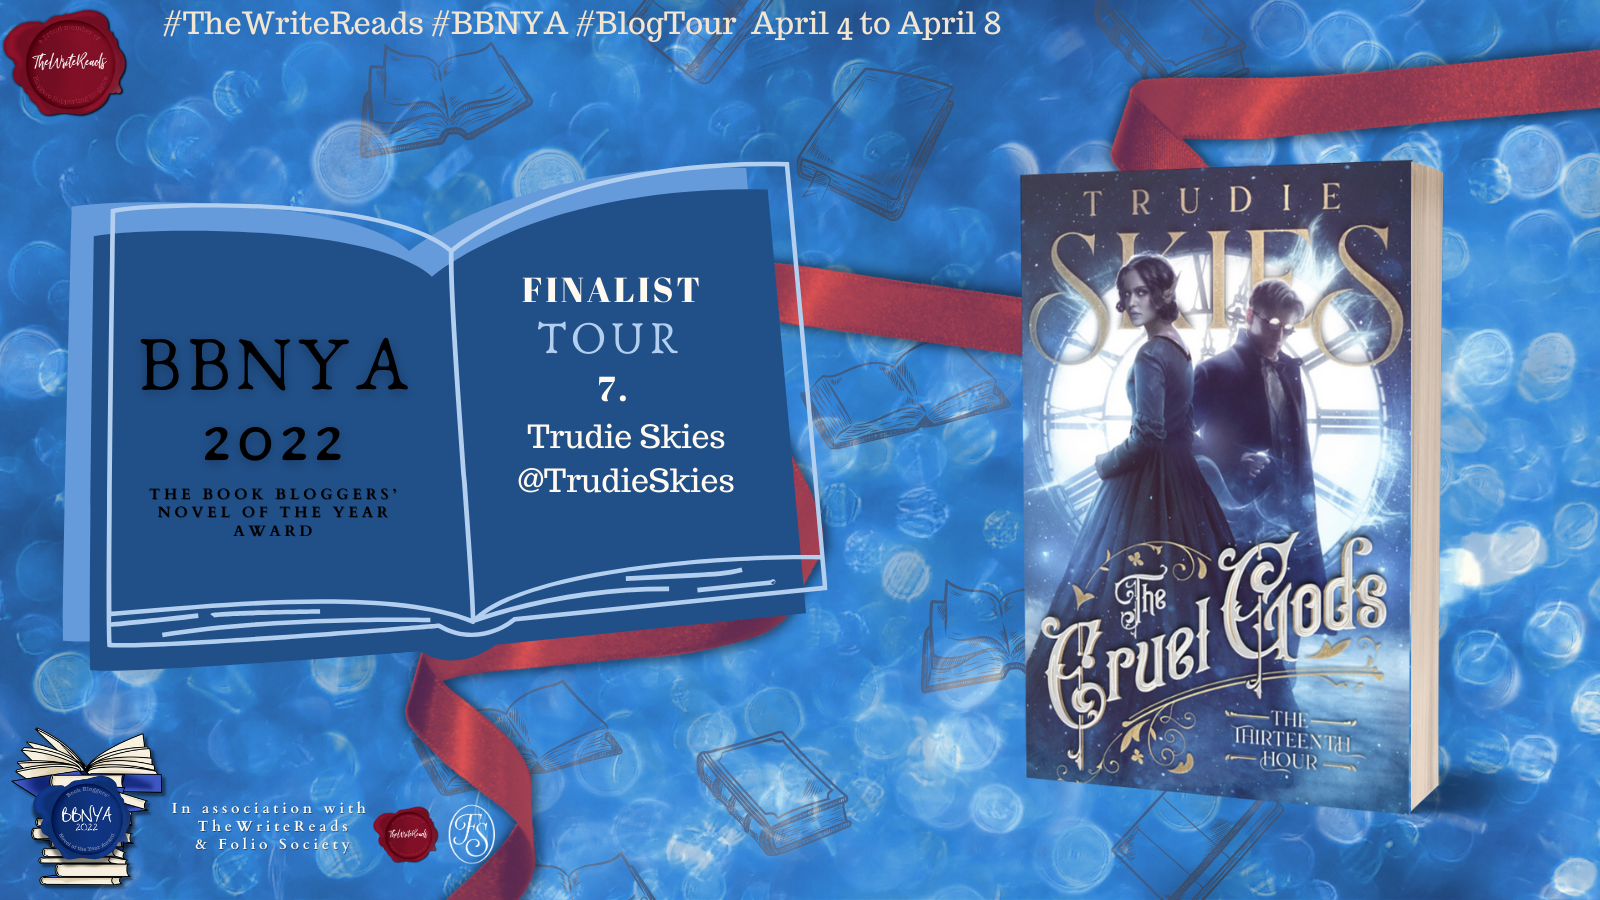 Blog tour graphic with information about the tour on blue next to image about the book